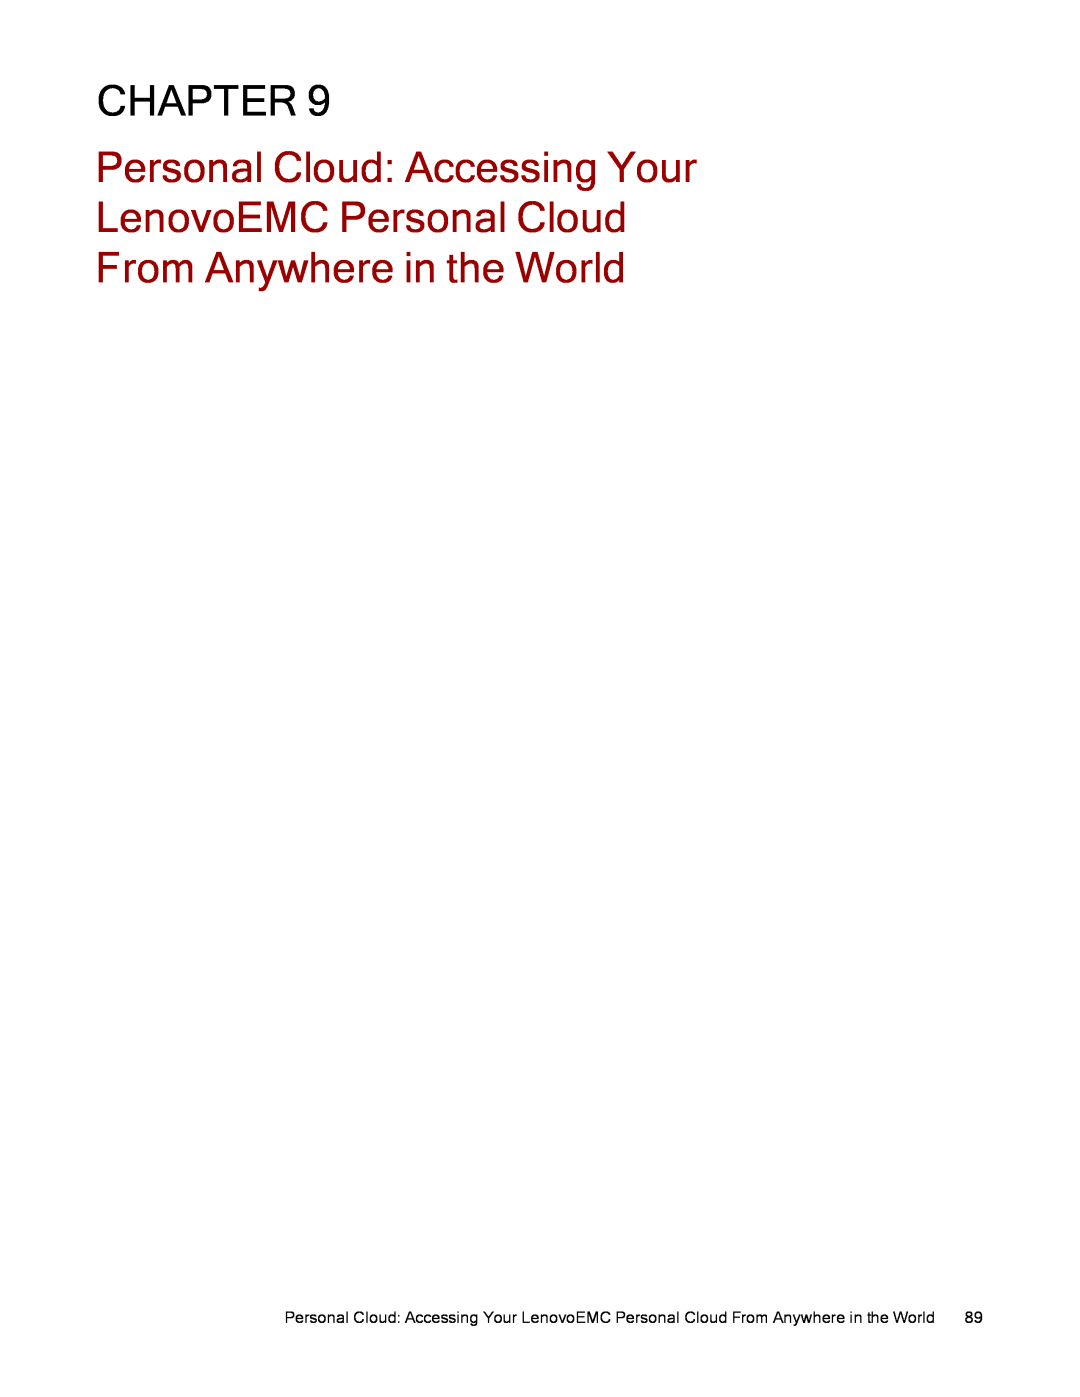 Lenovo 70BJ9005WW manual Personal Cloud: Accessing Your, LenovoEMC Personal Cloud, From Anywhere in the World, Chapter 